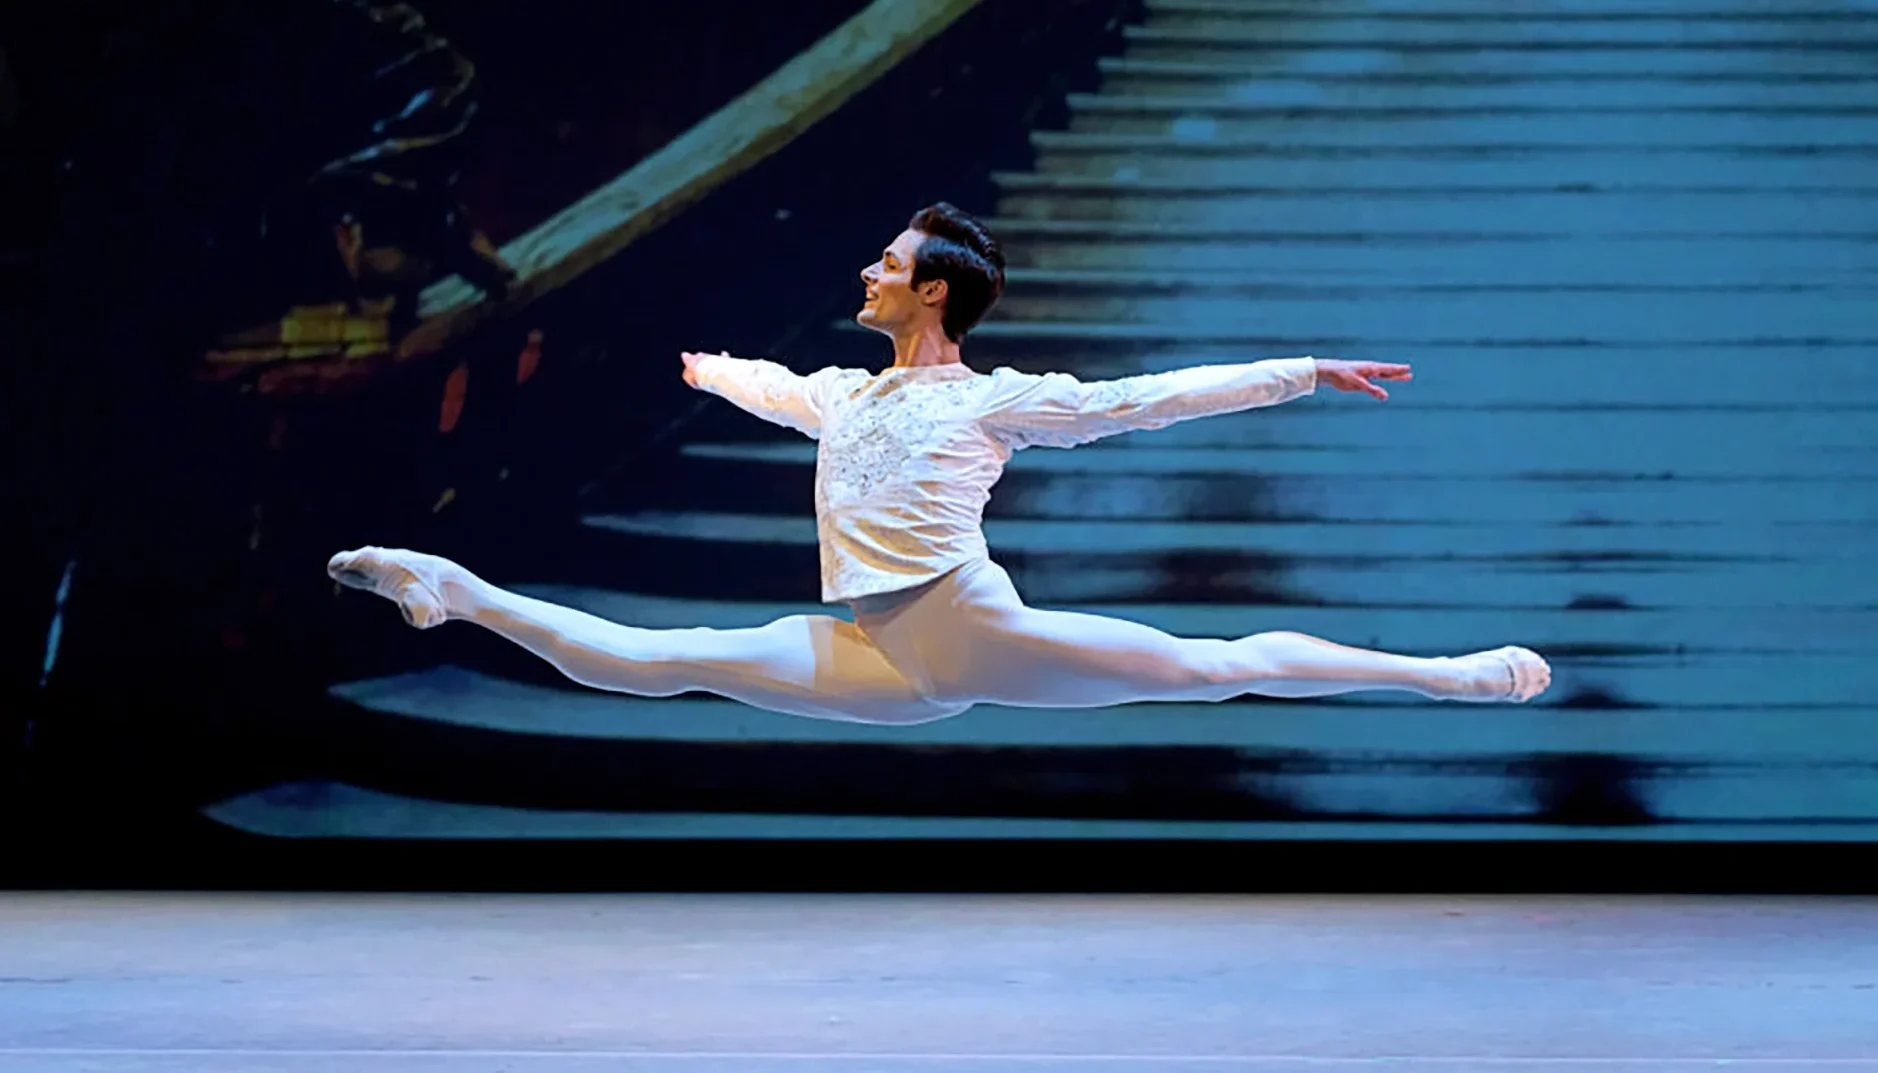 Jacopo Tissi flies through the air in a coupe jete en tournant, onstage in a princely costume.